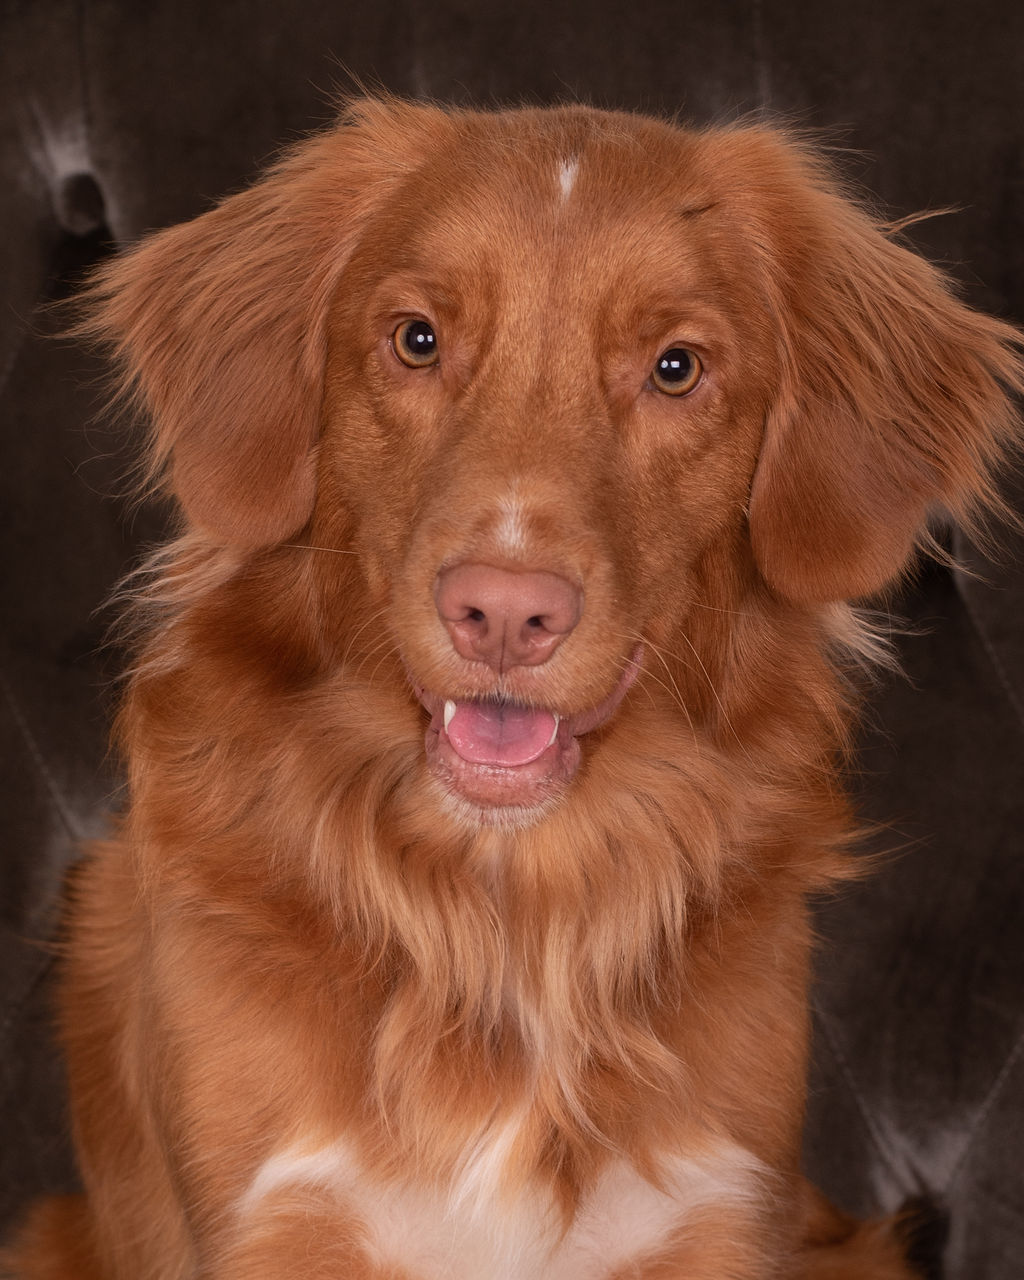 Meet Rosie, our year and a half old Certified Therapy Dog.  She is a breed known as a Nova Scotia Duck Tolling Retriever.  She has the same gentle, sweet personality like a Labrador or Golden Retriever, except she is much smaller.  Rosie is a great swimmer, and loves to play fetch.  In her spare time she is training to compete in agility.  